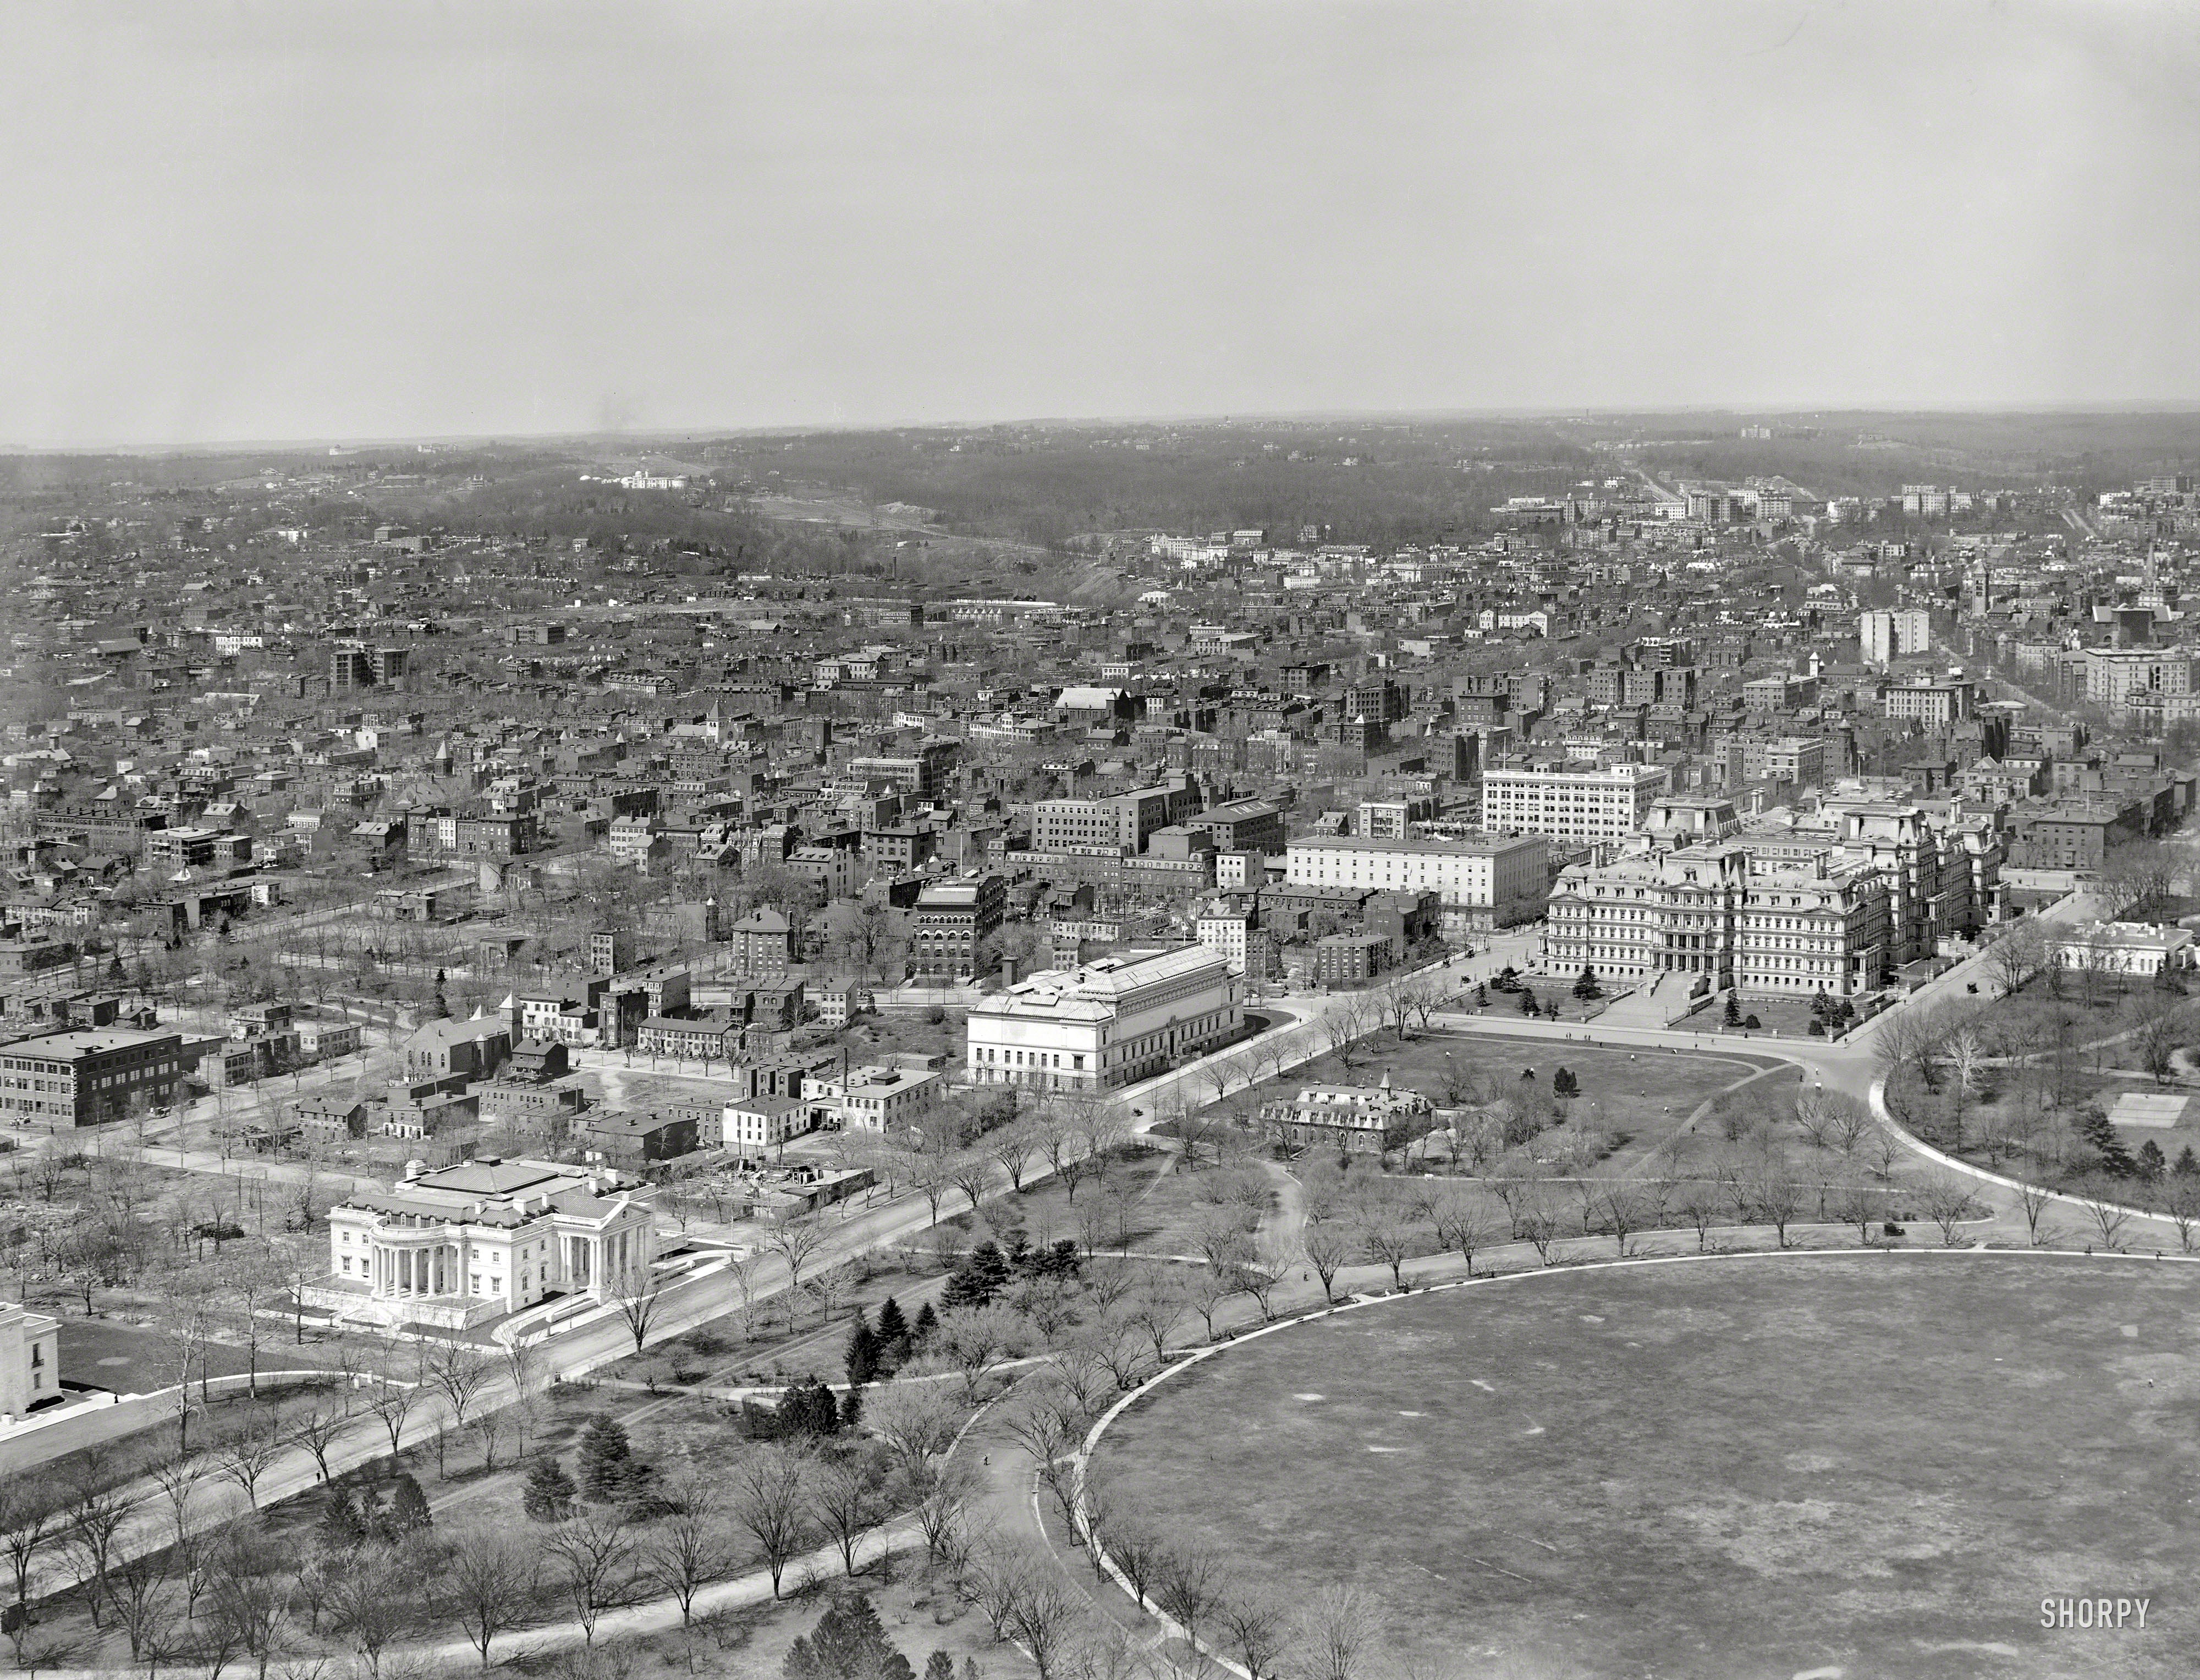 Circa 1911, our third selection from the panoramic series "Washington from Washington Monument." Landmarks include, from left, Memorial Continental Hall (headquarters of the Daughters of the American Revolution); the Corcoran Gallery of Art; State, War and Navy Building; and White House West Wingtip. 8x10 inch glass negative, Detroit Publishing Company. View full size.